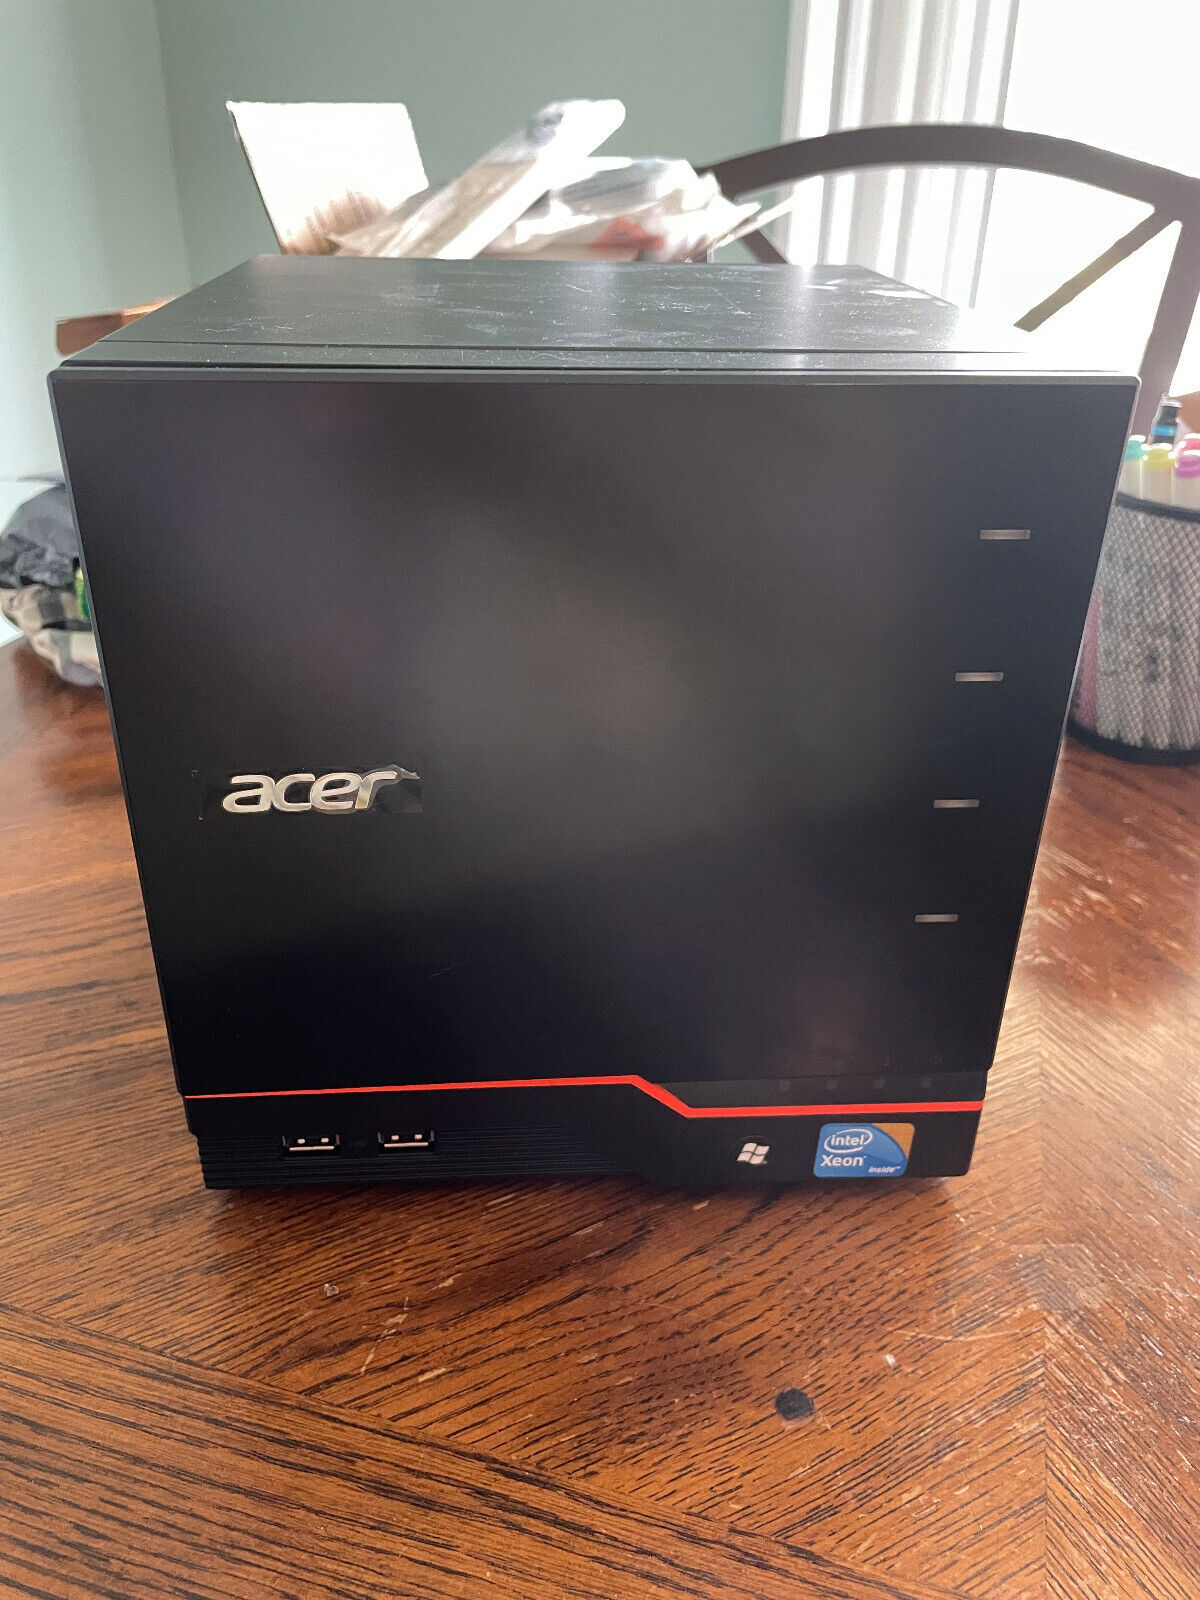 Acer AC100S Cube Microserver (Xeon-E31260L @2.4Ghz / 8GB Ram / 2.0 TB HDD Space)